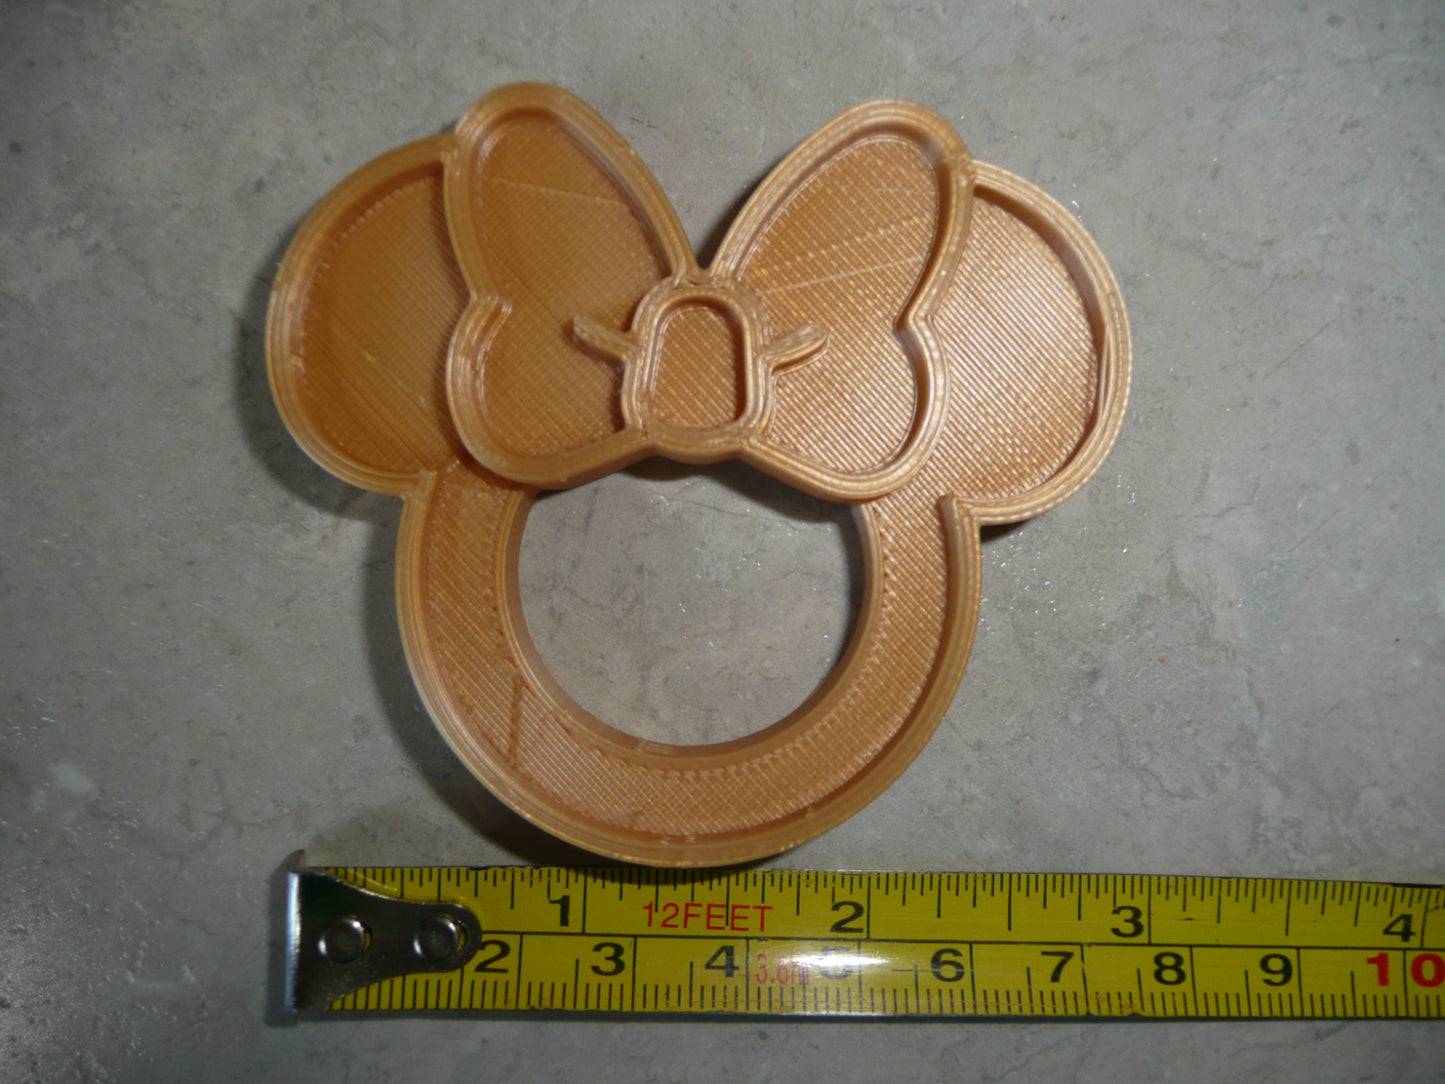 Minnie Mouse Themed Gold Napkin Ring Holders Set Of 4 Made In USA PR4806